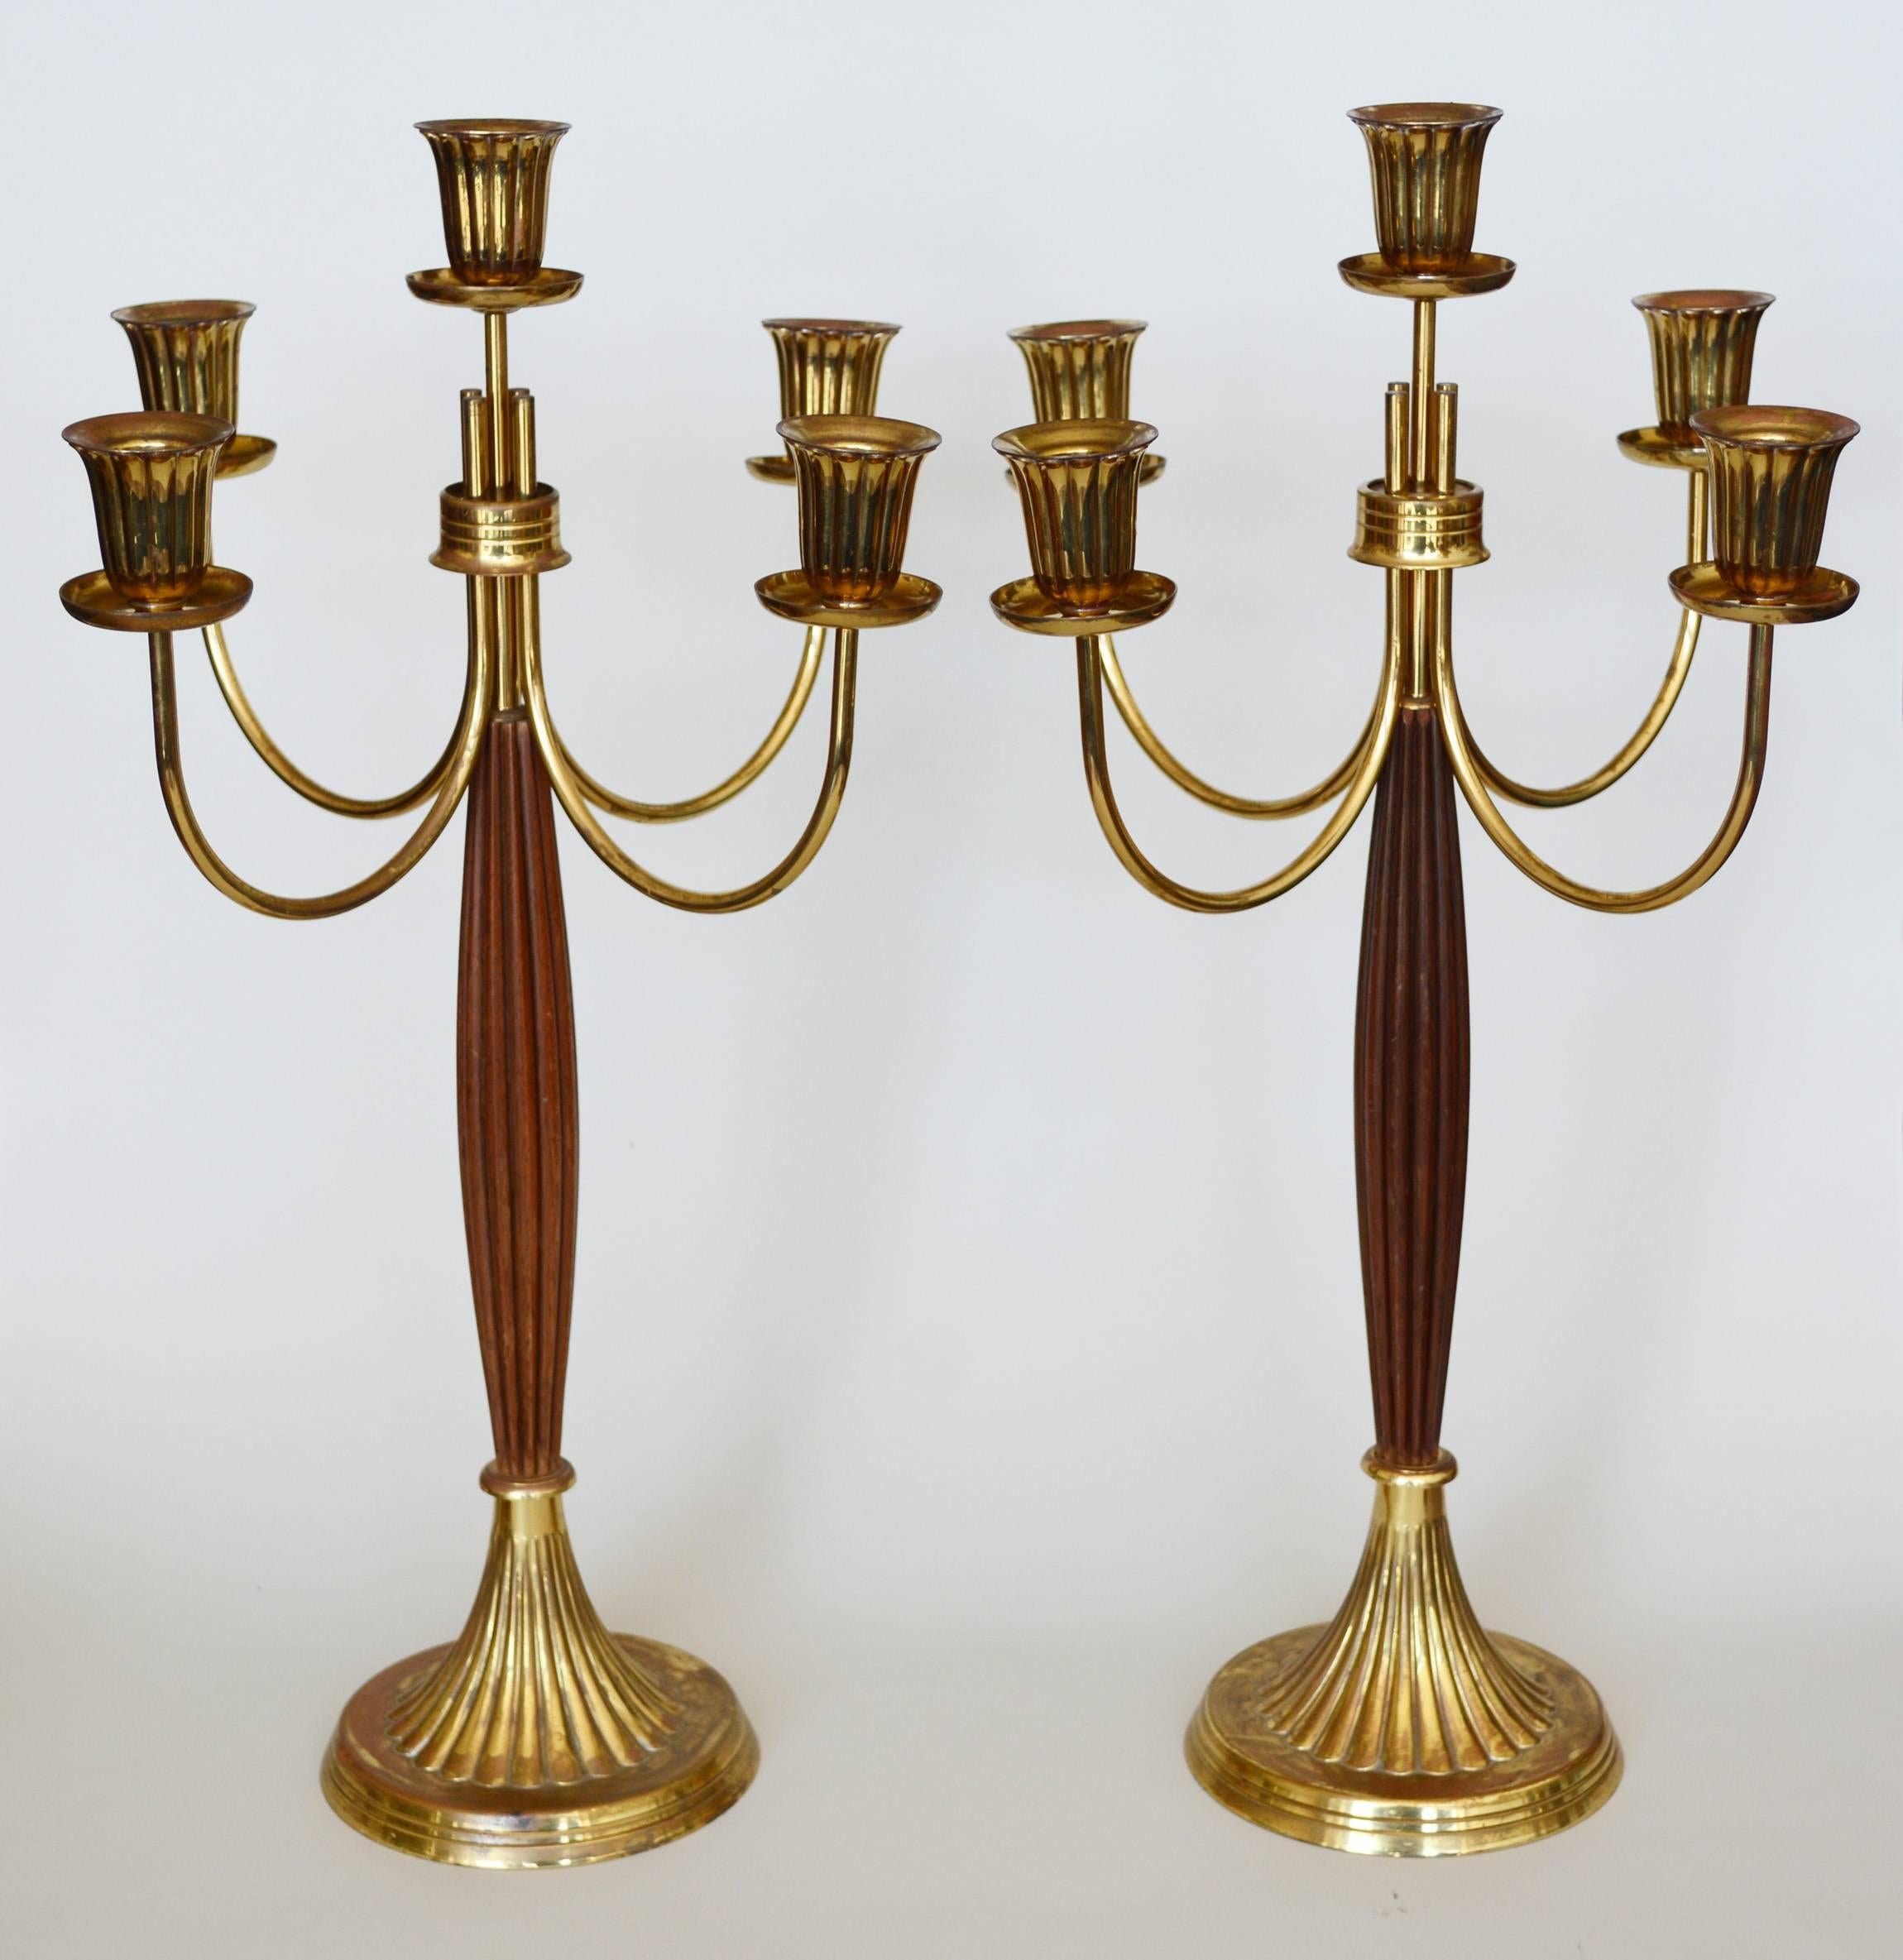 Pair of candelabras made by Dorlyn Silversmith. These each have five brass ribbed holders and a brass ribbed base. The column is ribbed walnut. These are in original condition. There is some light tarnishing. Not all the holders are exactly